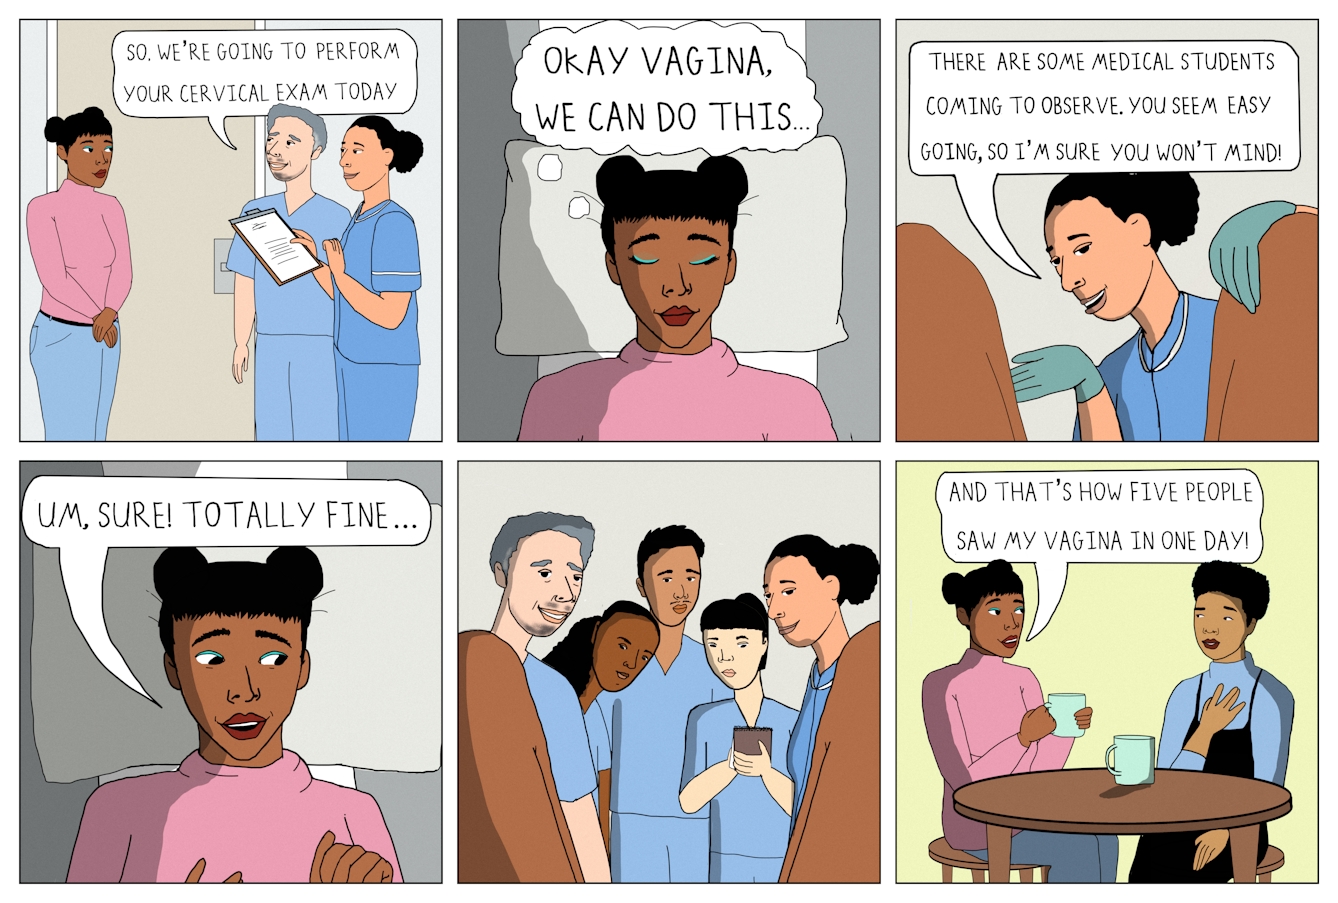 Six panel colour comic strip in a grid of 3 panels wide by 2 panels high.  

Panel one shows a woman standing in front of a door speaking to two medical professionals. She is wearing a pink jumper and blue jeans, with her hair in two buns. She looks unsure. The two medical professionals are wearing blue scrubs, the person on the left has a speech bubble reading 'So. We're going to perform your cervical exam today.' The person on the right is holding a clipboard, they are both smiling. 

Panel two shows the woman in the pink jumper lying with her head on a pillow, she looks calm. A thought bubble from her head reads 'Okay vagina, we can do this...'

Panel three shows the woman's knees bent and a smiling medical professional between them, resting her gloved hand on her knee. A speech bubble from her reads 'There are some medical students coming to observe, you seem easy going, so I'm sure you won't mind.' 

Panel four shows the woman in the pink jumper with her head on the pillow, looking slightly uncomfortable. A speech bubble reads 'Um, sure! Totally fine...'

Panel five shows her knees bent and a group of five medical professionals standing in front of her. They are all looking at her and one of them is holding a notepad, writing in it. 

Panel six shows the woman in the pink jumper with a friend sitting at a table. She is holding a blue mug and a speech bubble reads 'And that's how five people saw my vagina in one day!' Her friend is wearing a blue jumper with a black jumpsuit over this, they have short black hair. 